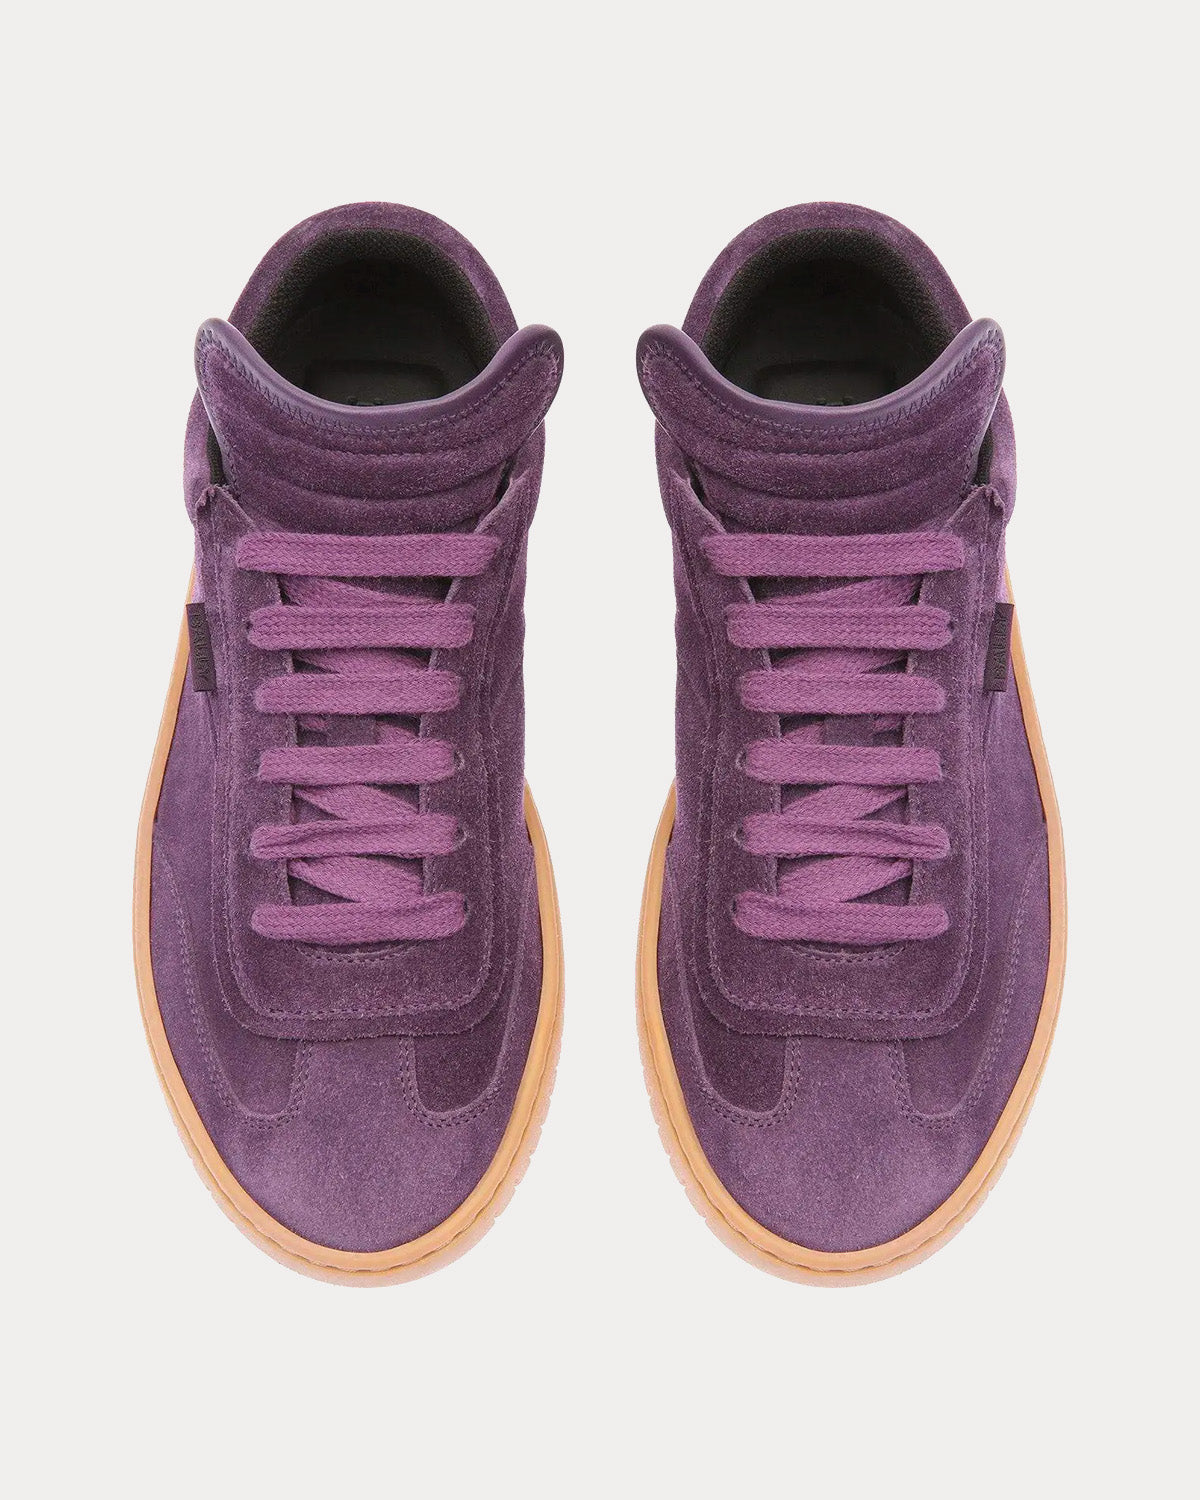 Bally - Player Suede Orchid / Amber Low Top Sneakers